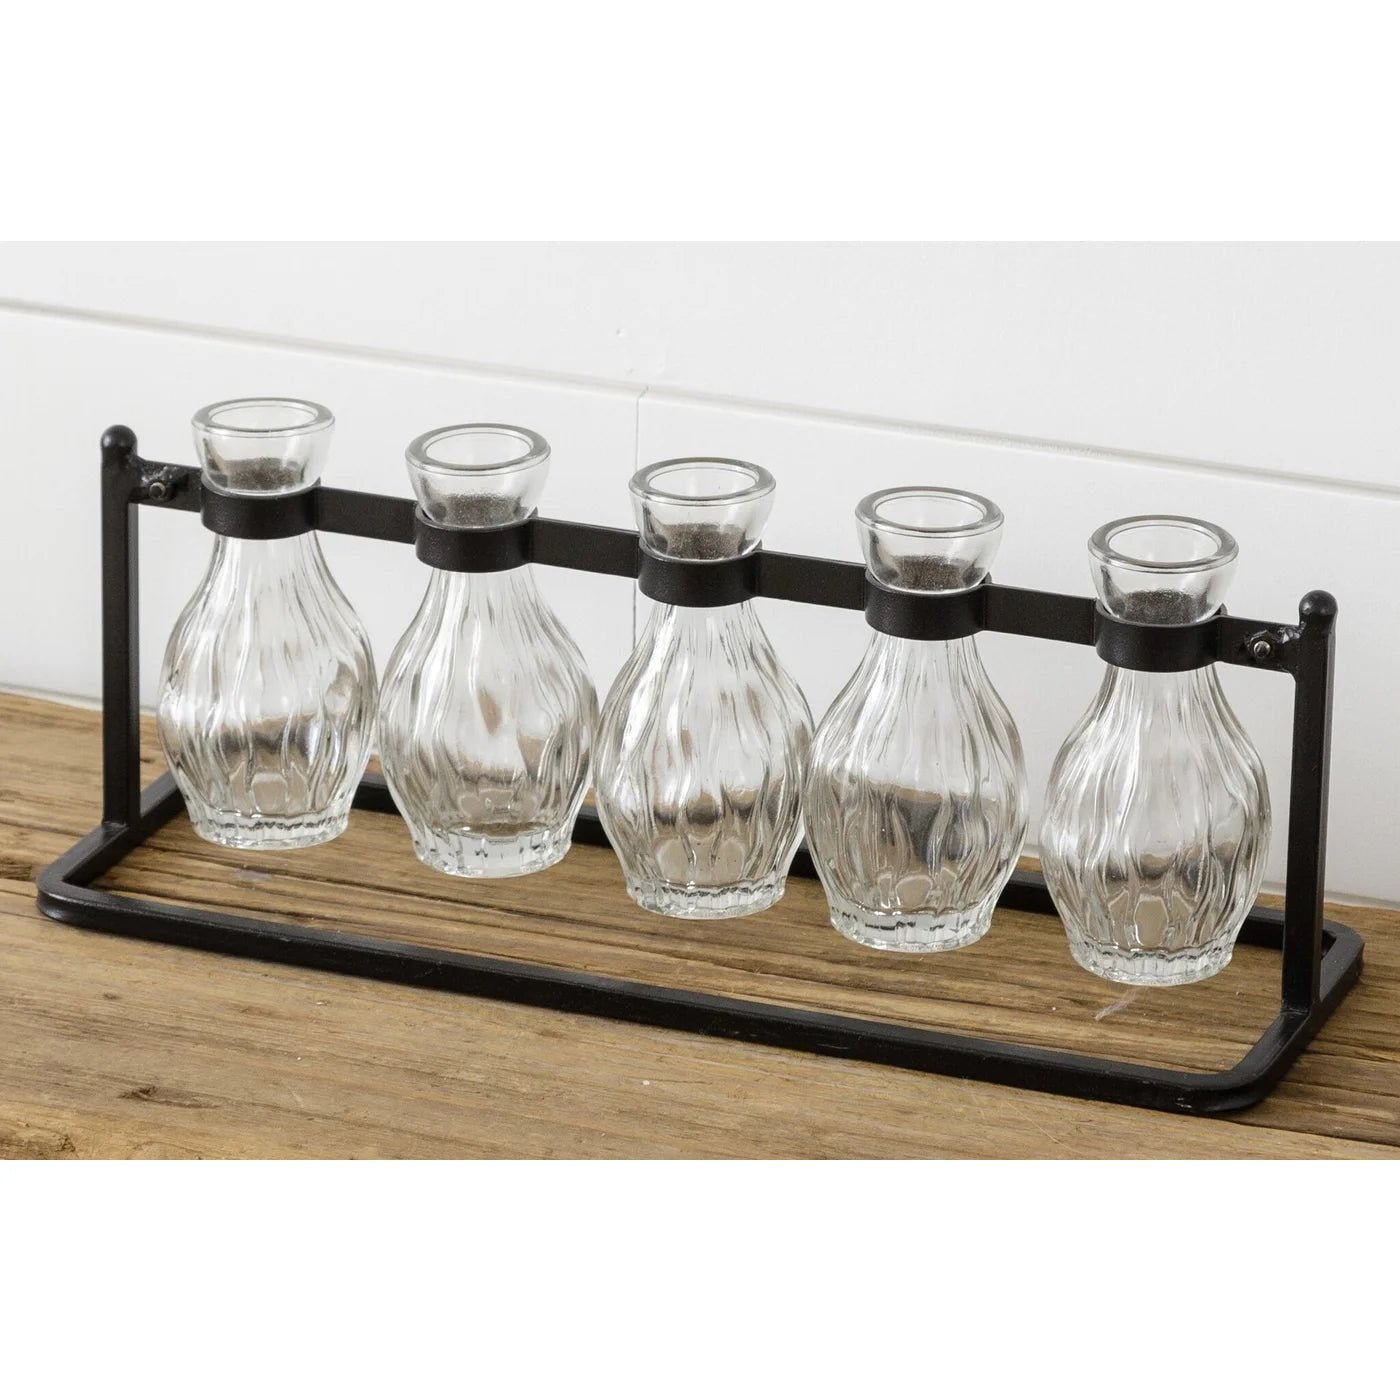 Clustered Hanging Bud Vase With 5 Bottles - The Brass Bee